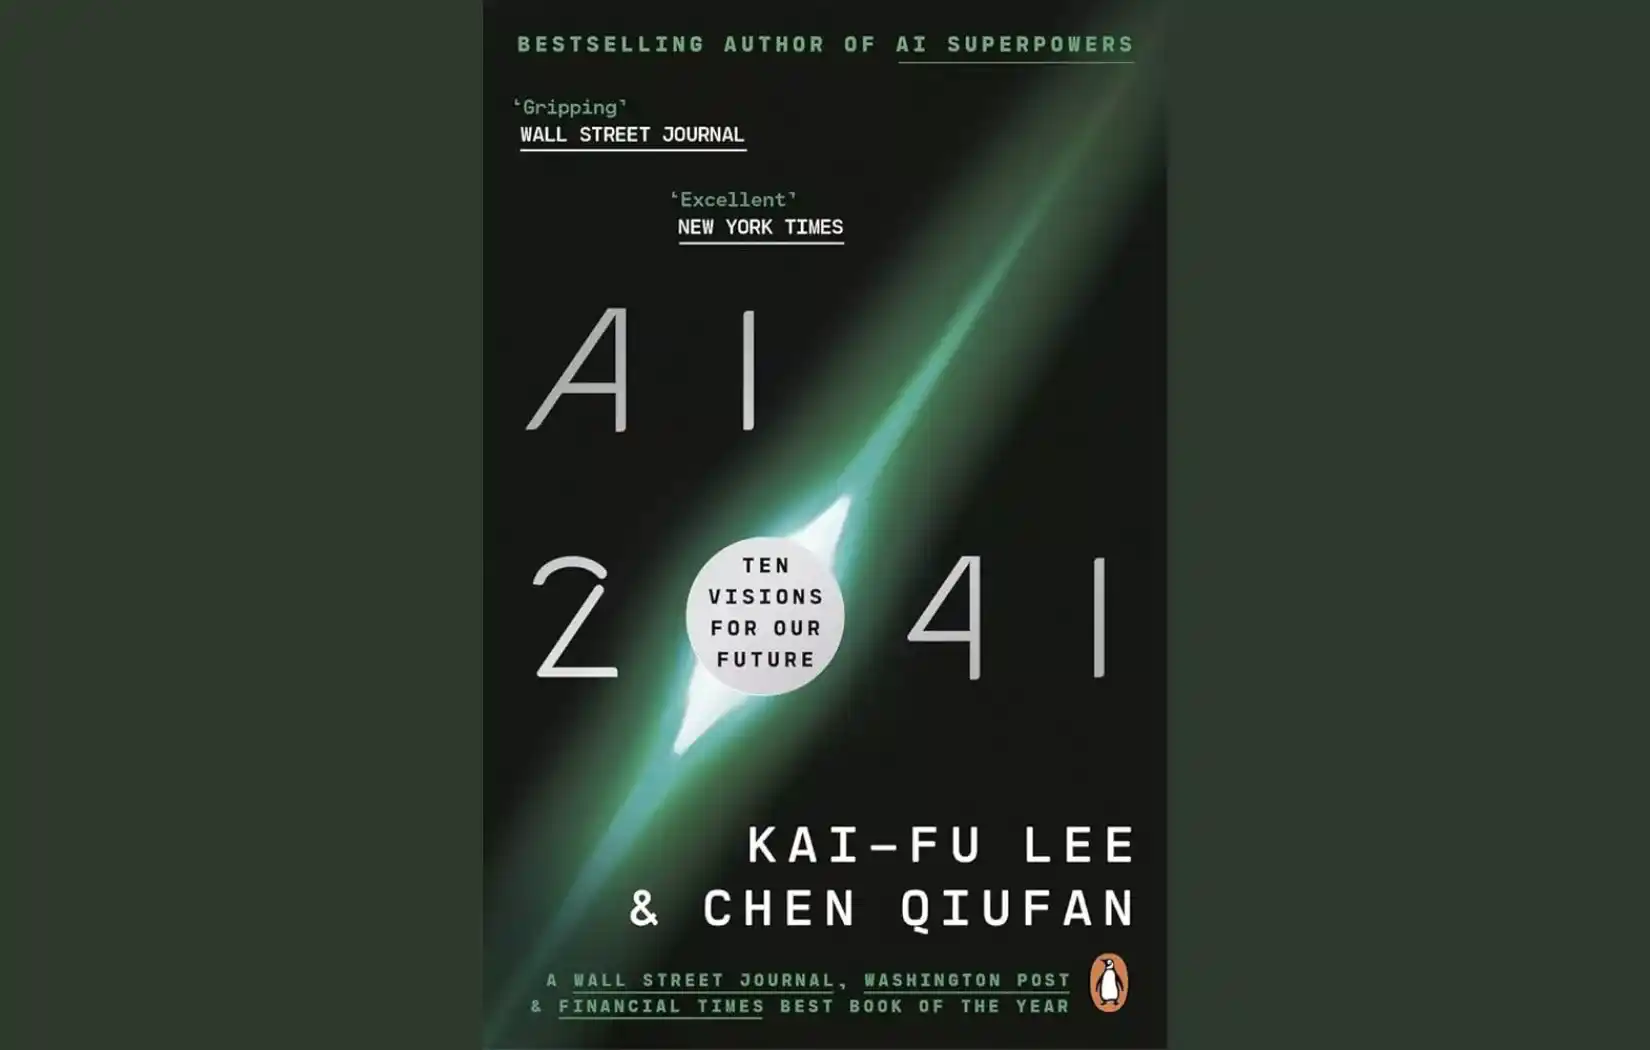 Artificial Intelligence Book